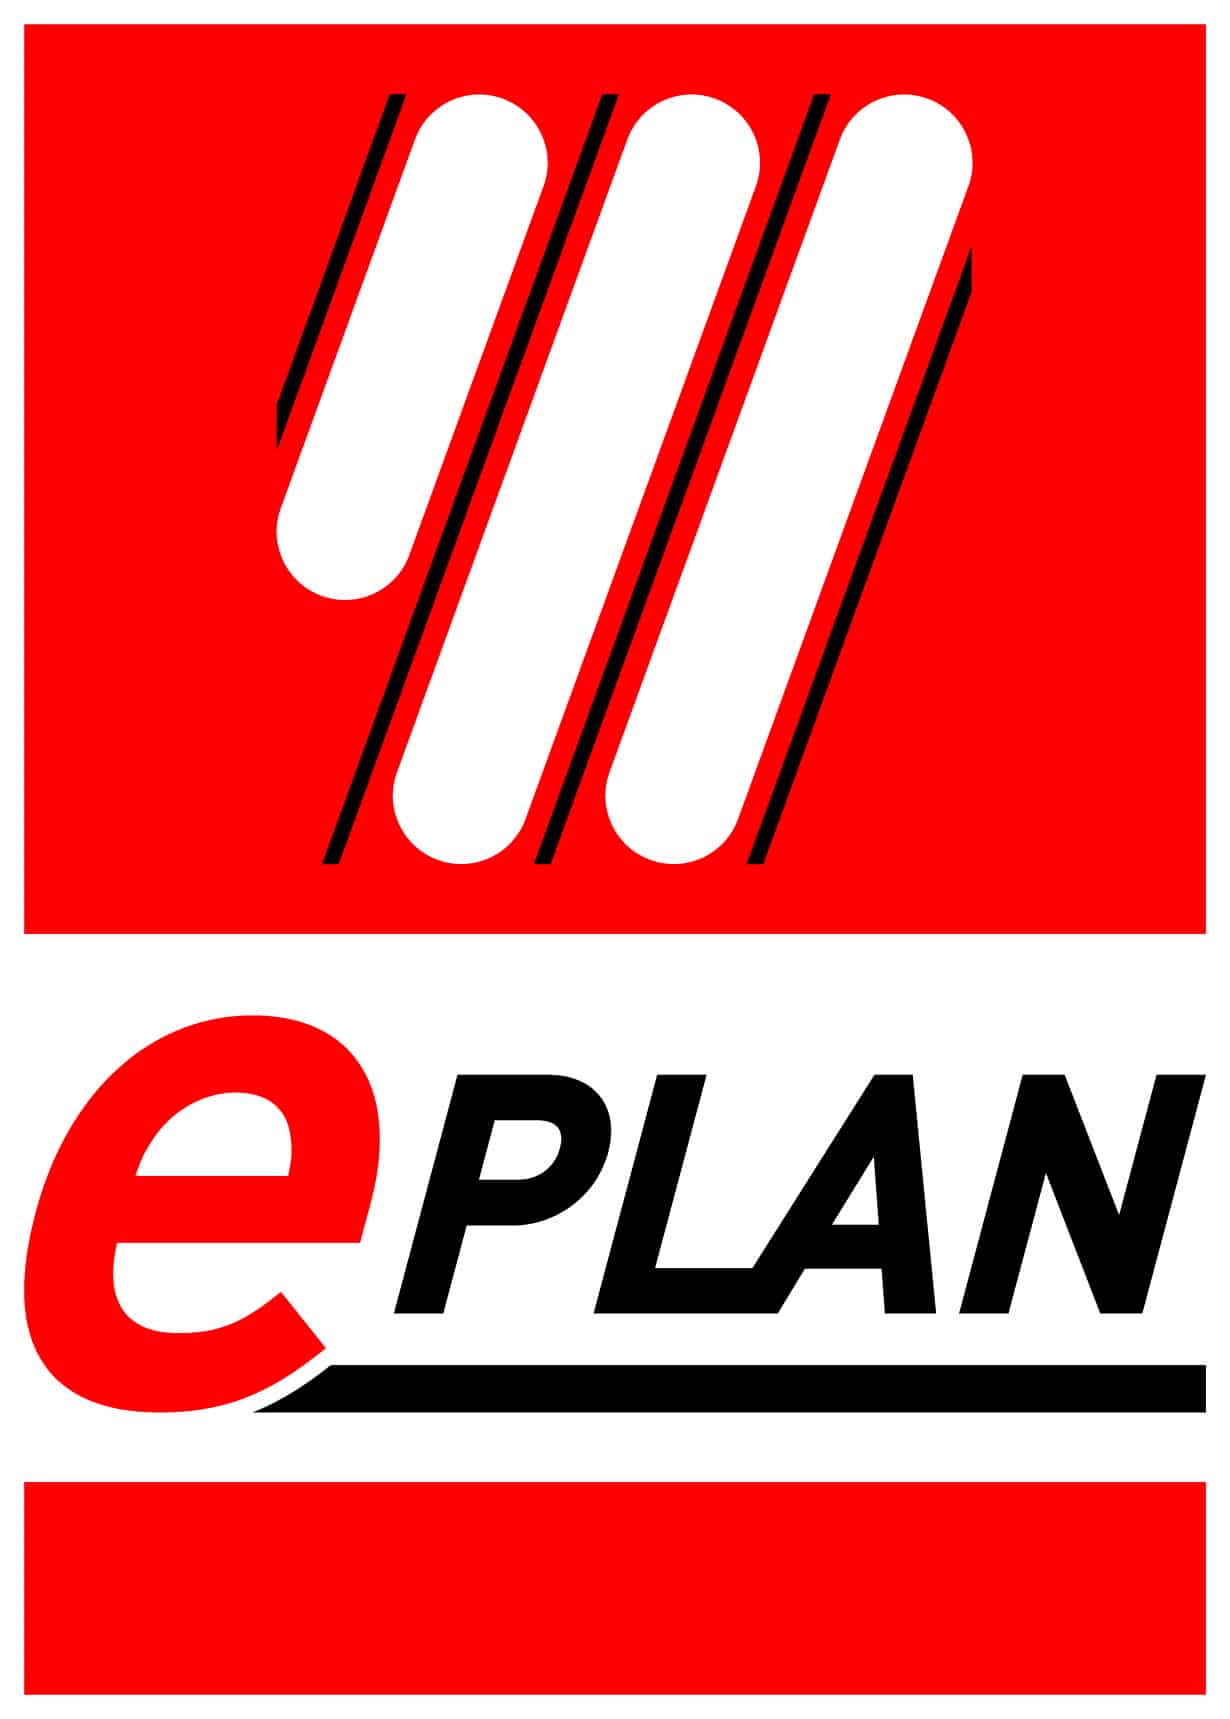 EPLAN integration for any ERP system, using Agni Link